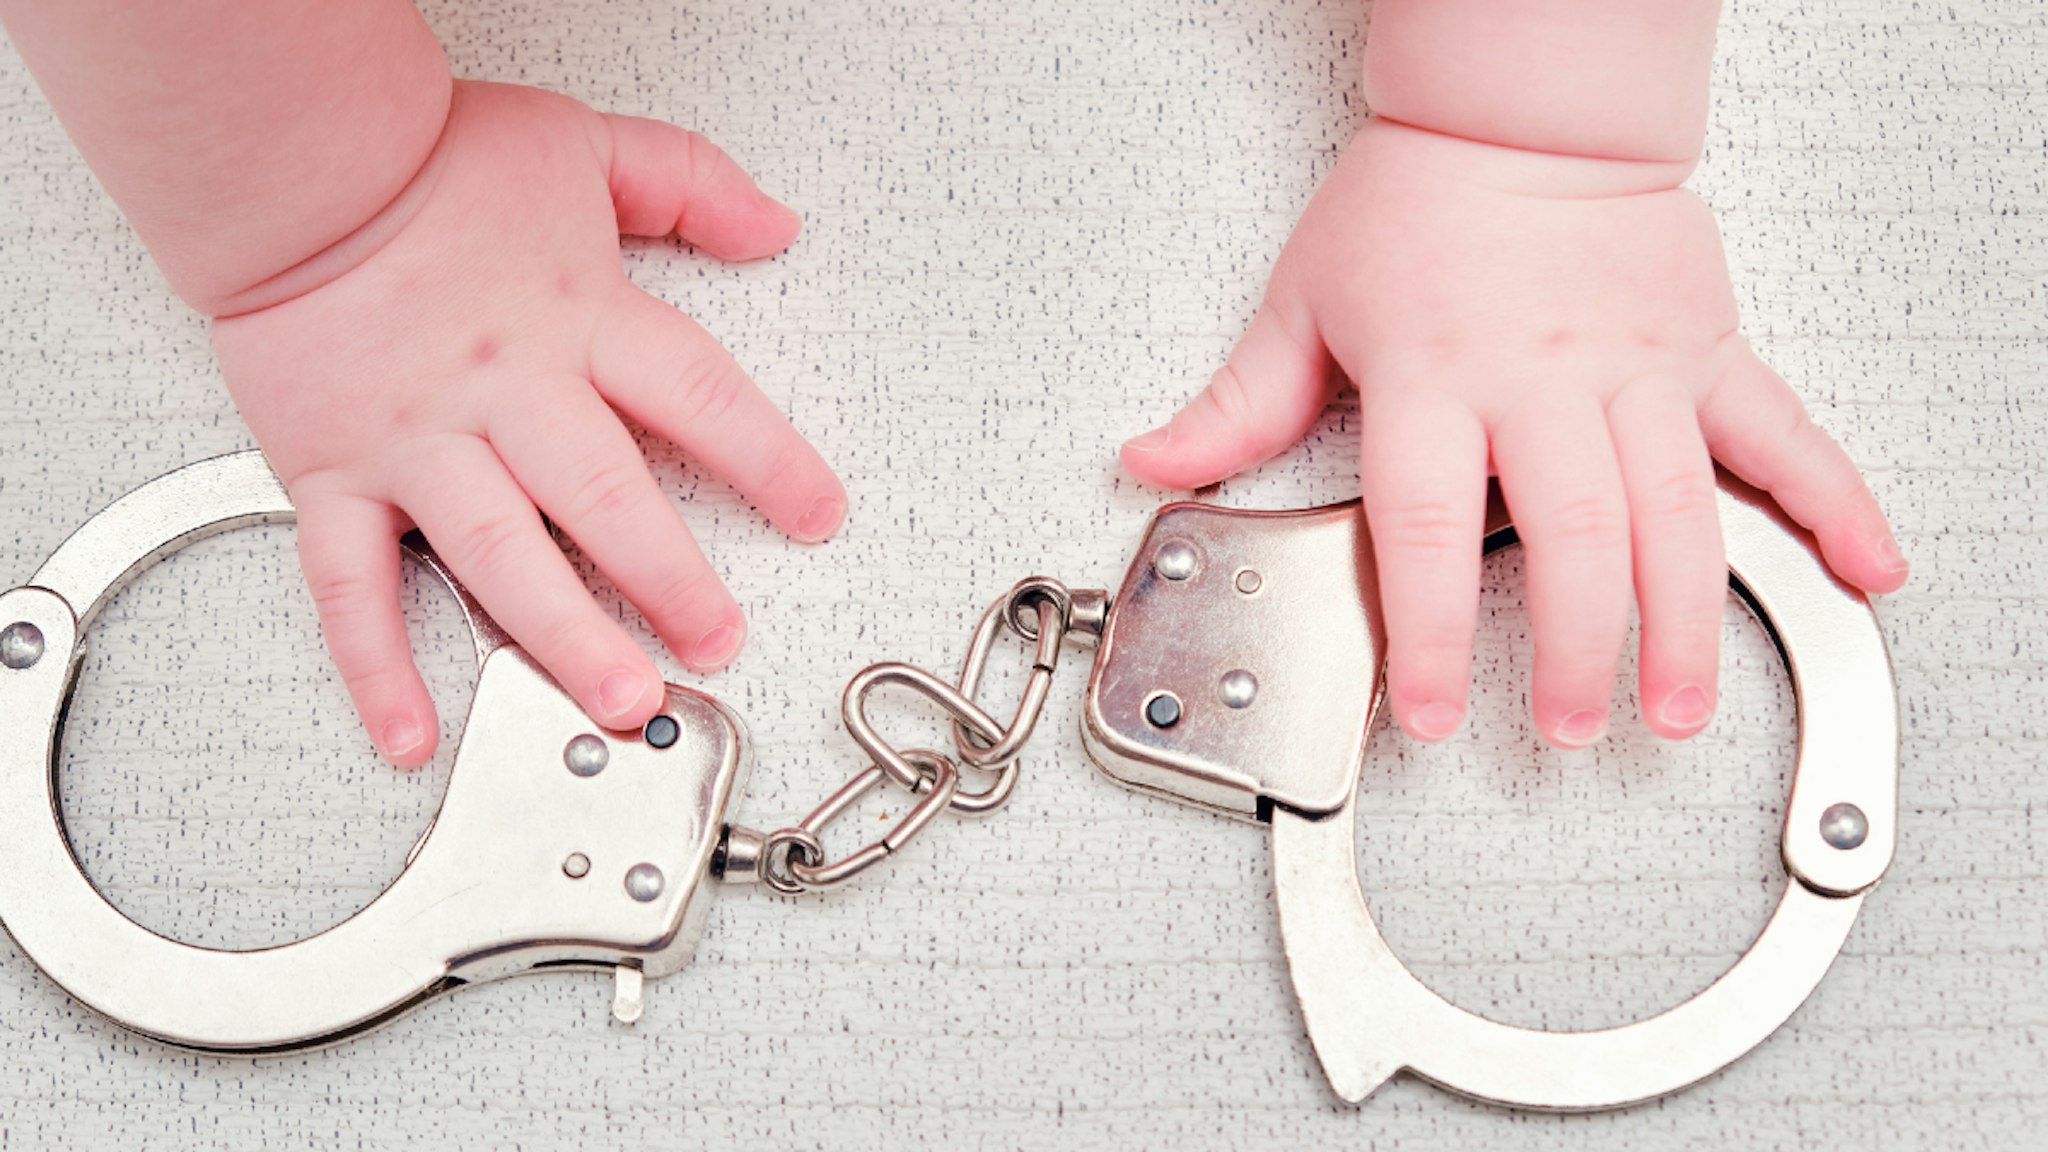 Baby hand and handcuffs, close-up. Children fingers and an object on a white background